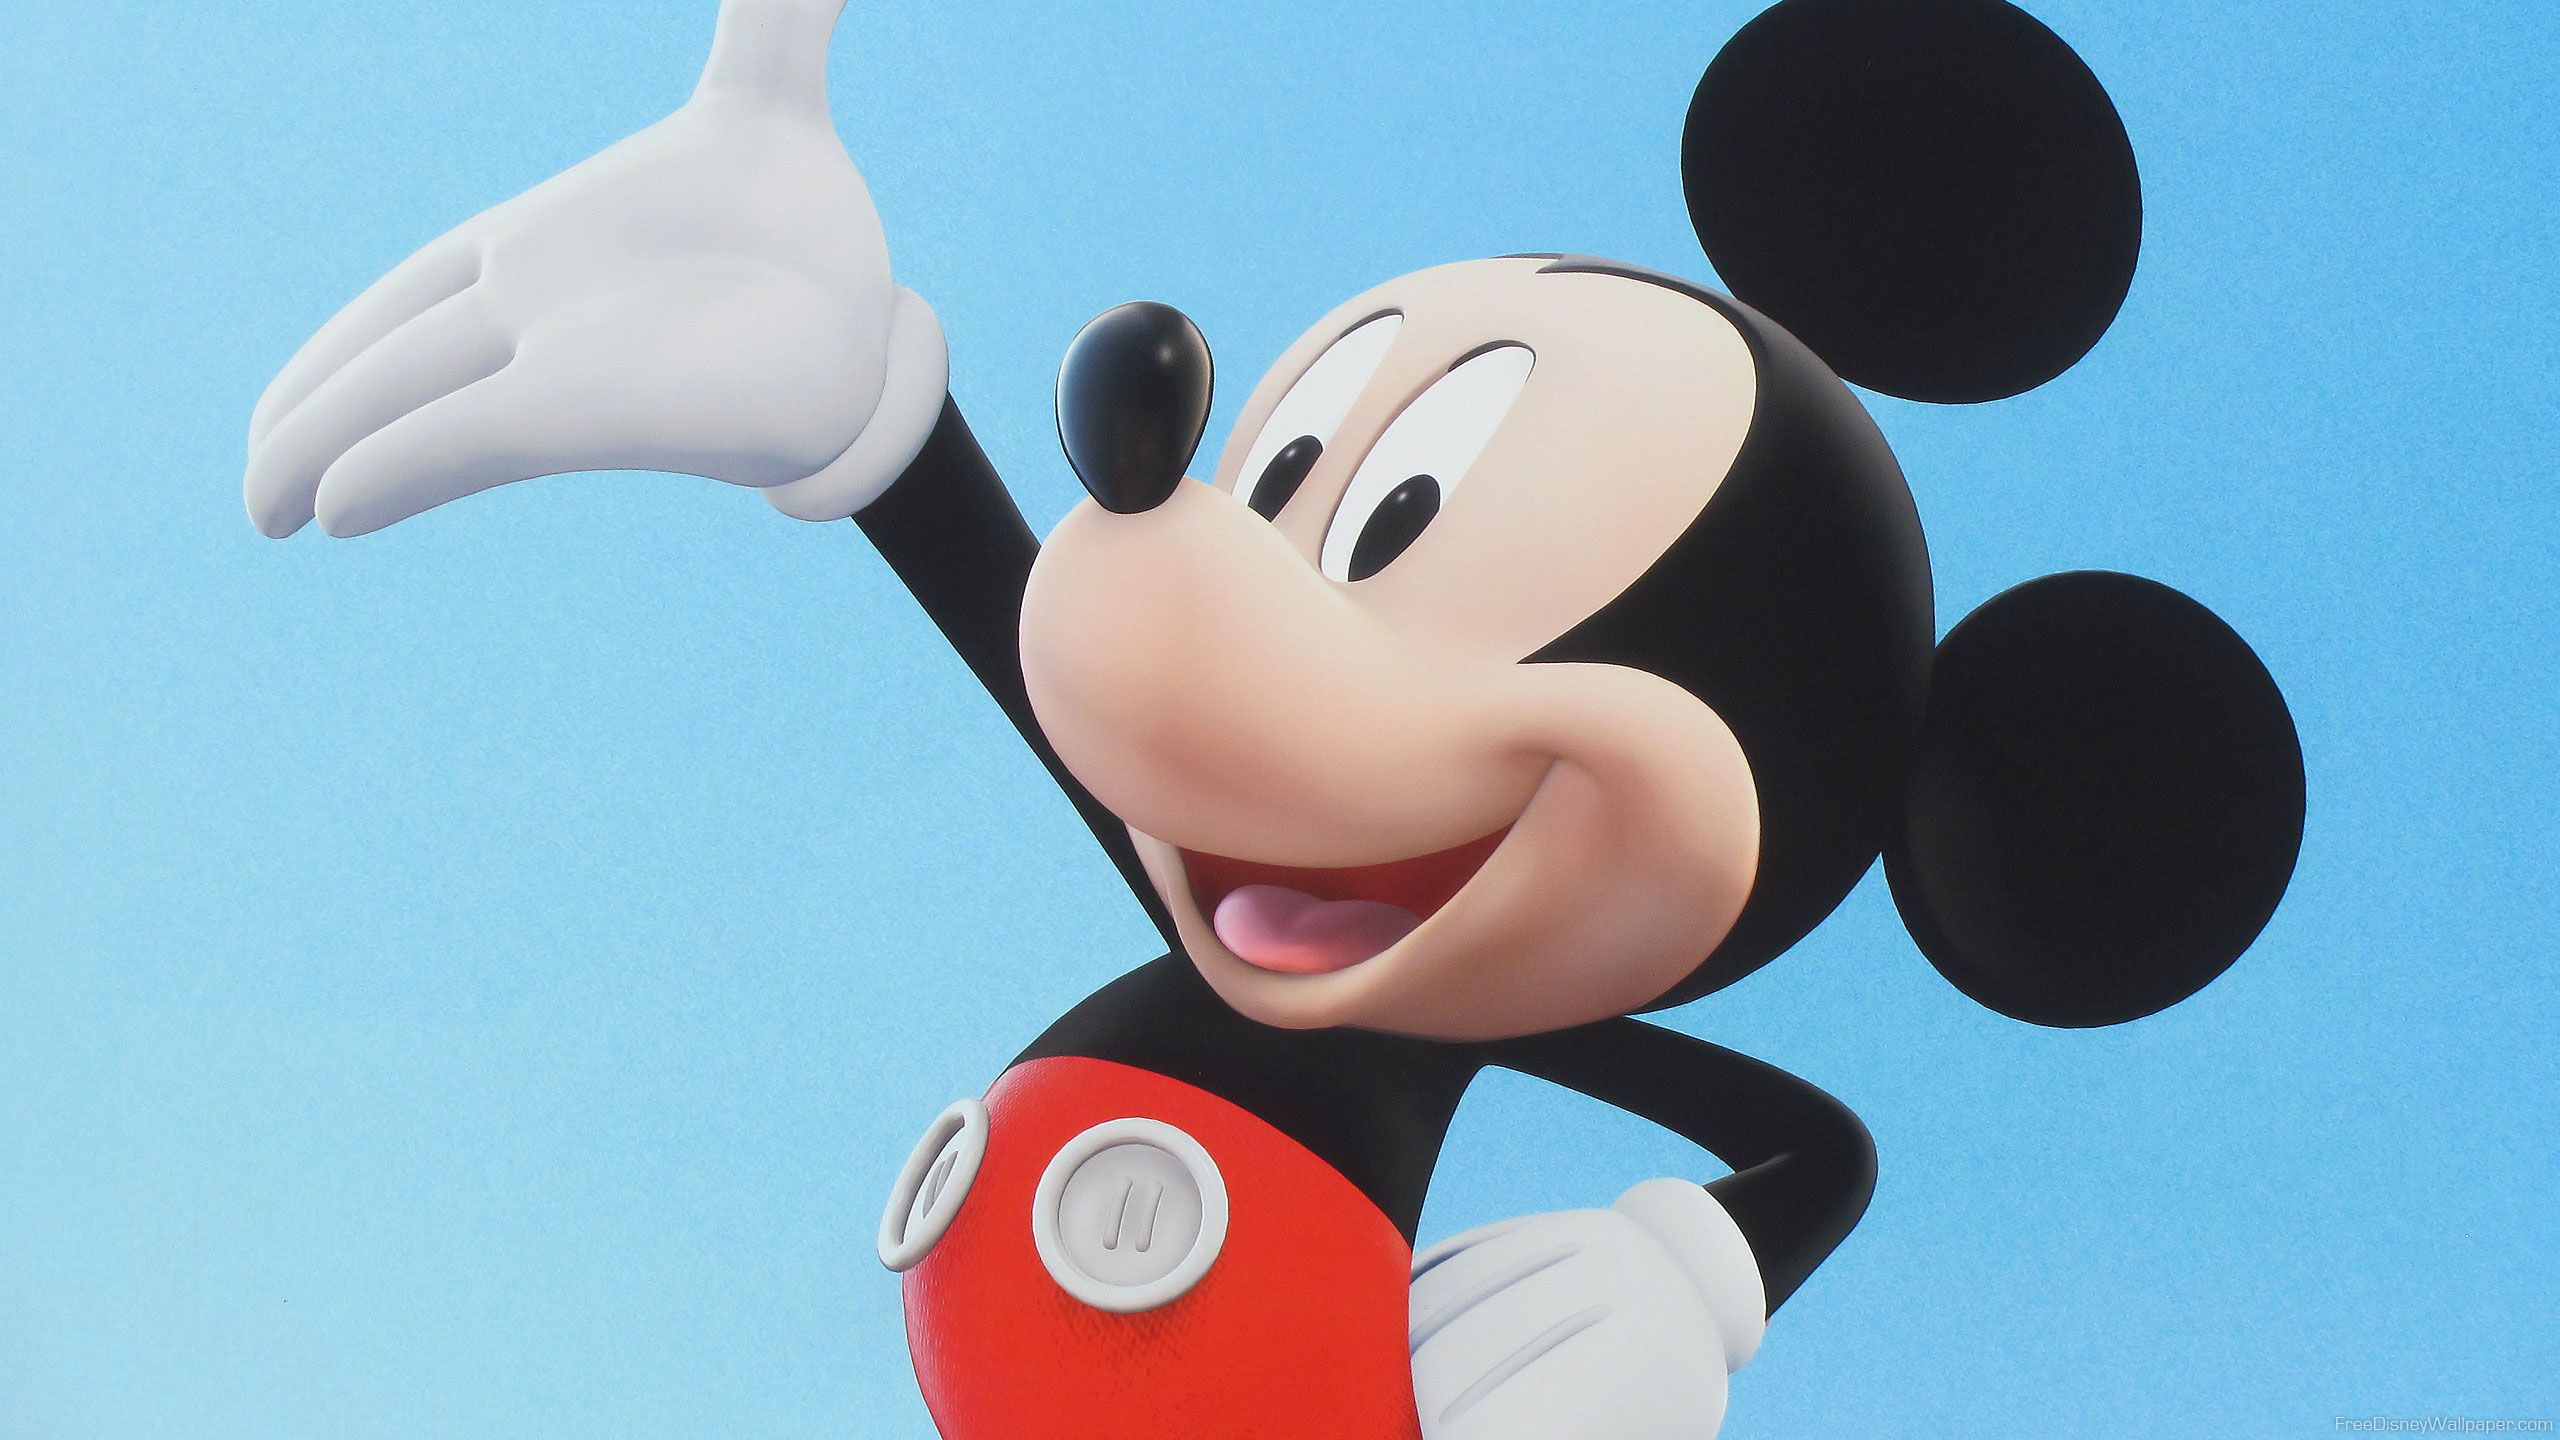 Cool Mickey Mouse Wallpapers on WallpaperDog